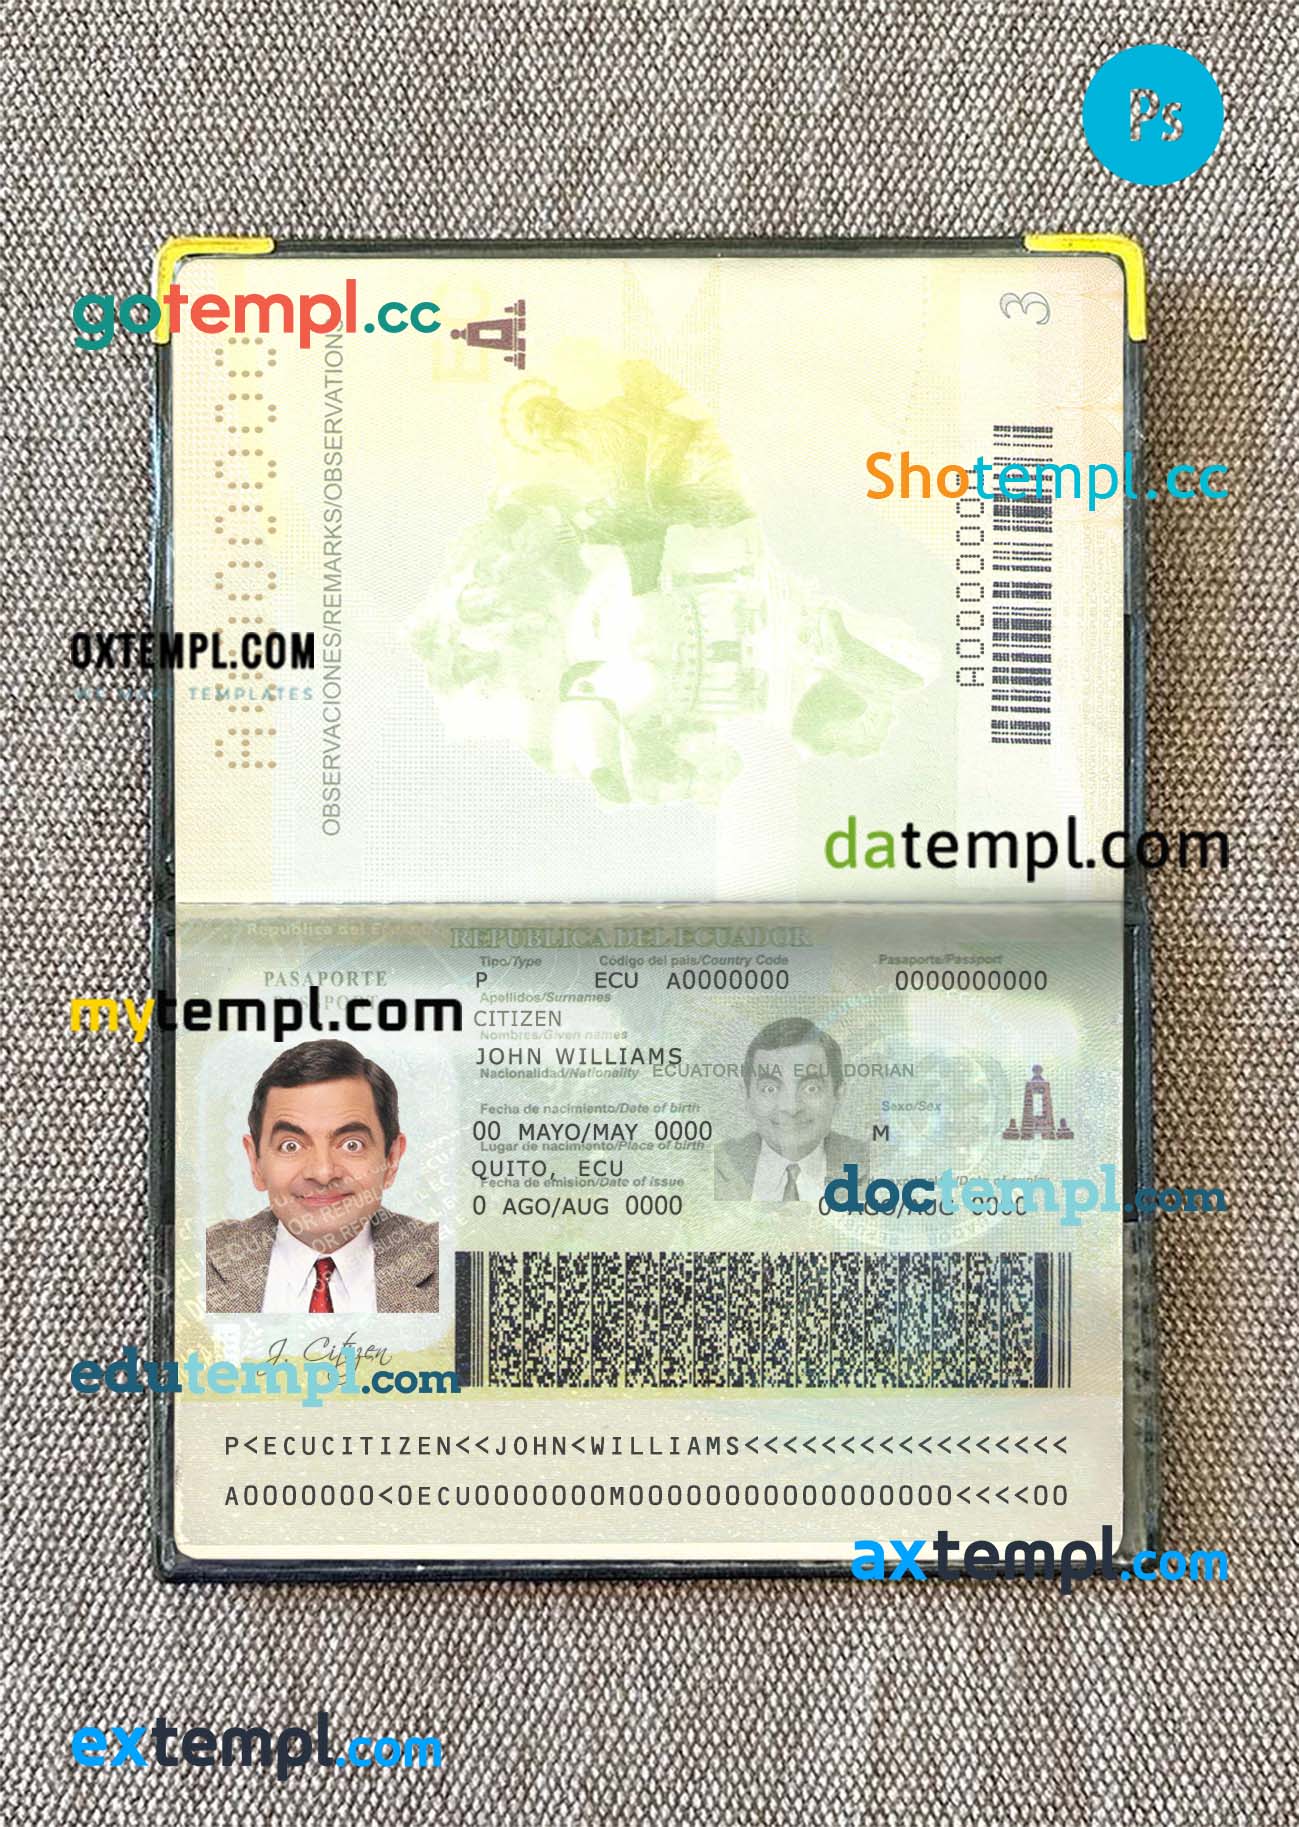 Mexico passport PSD files, editable scan and photo-realistic look sample, 2 in 1